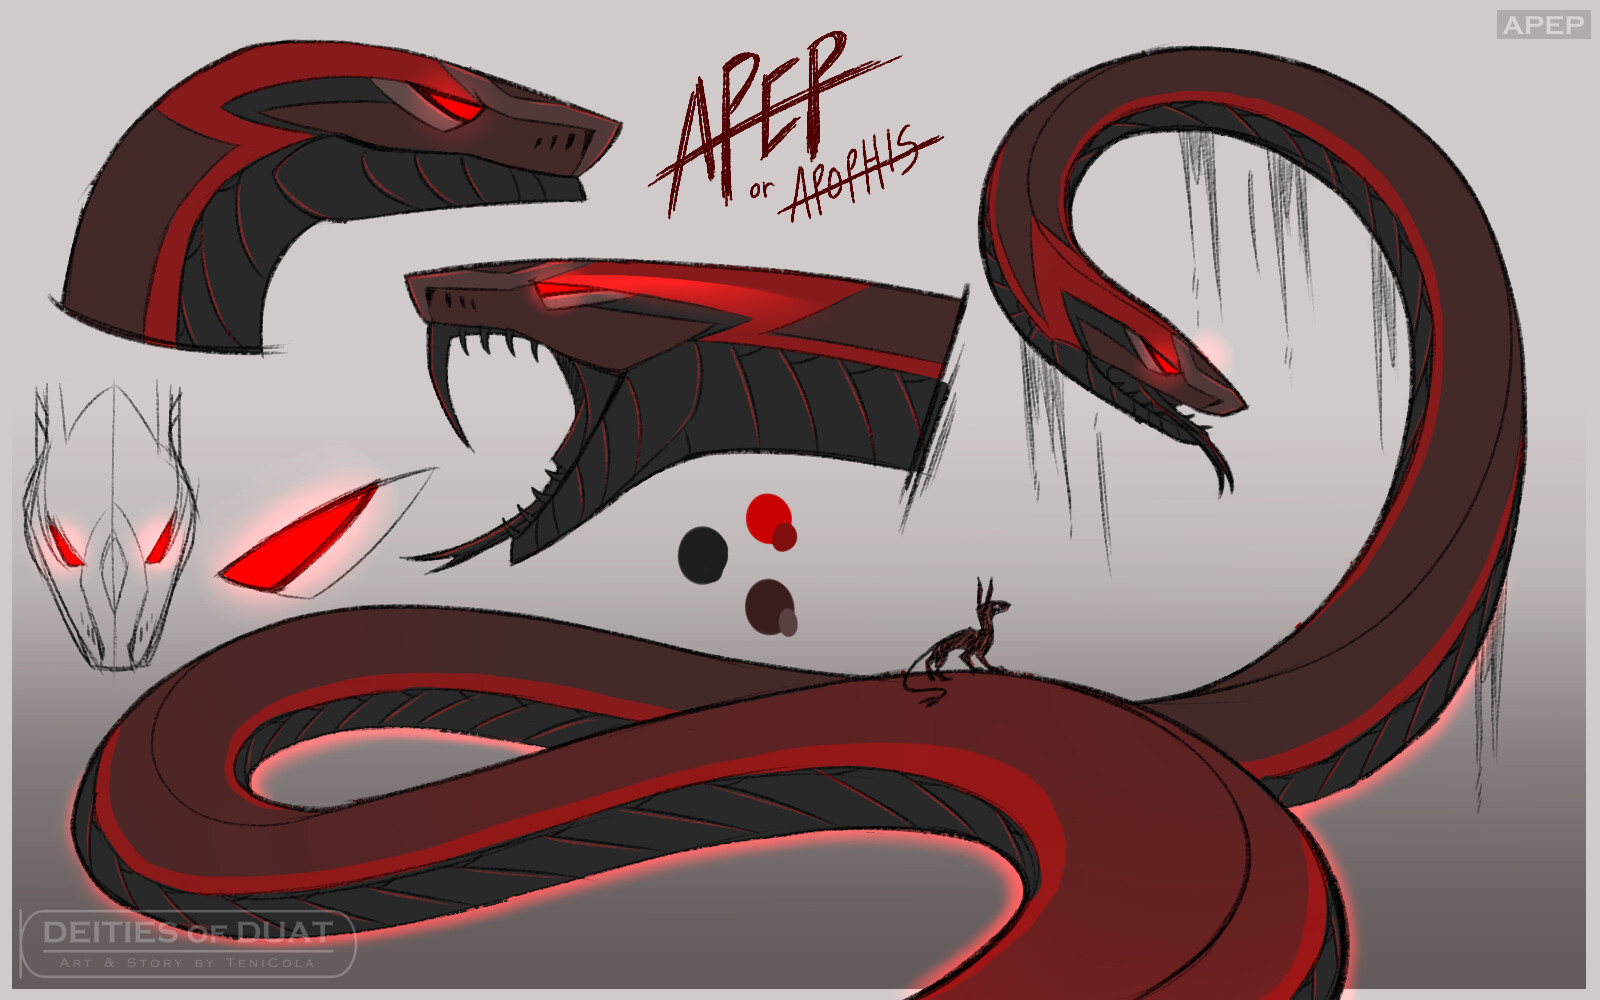 APEP – The demon manifestation of darkness, destruction, and primordial chaos. Apep is the representation of all things evil in Egyptian mythology, as well as in DEITIES.